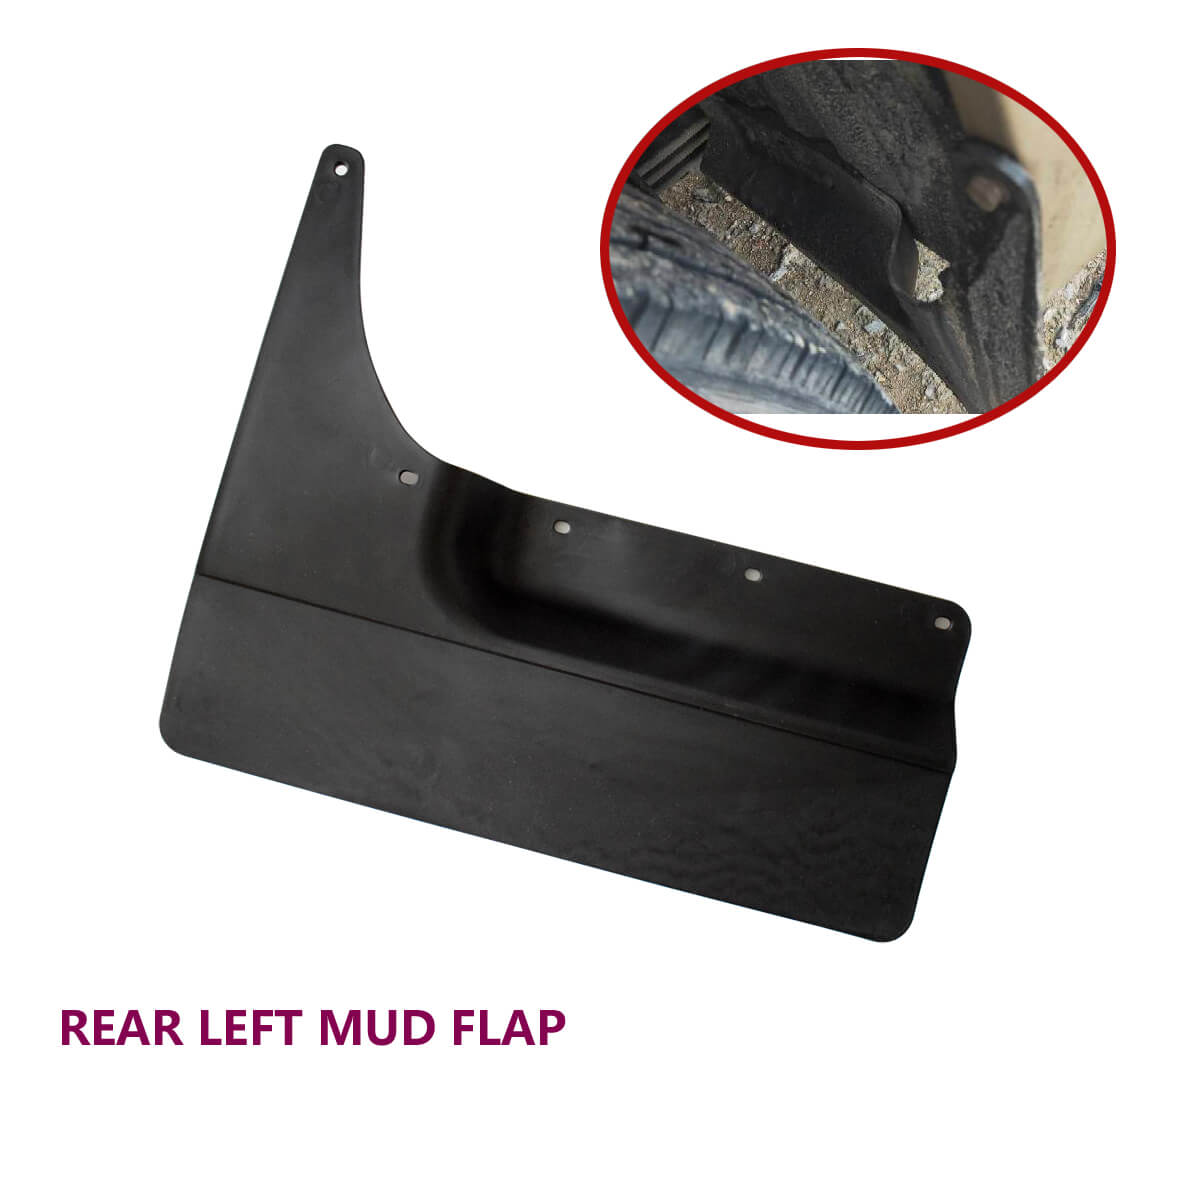 Mud Flaps fit for Toyota Coaster Front Rear Mudguards-Paitime YC101185